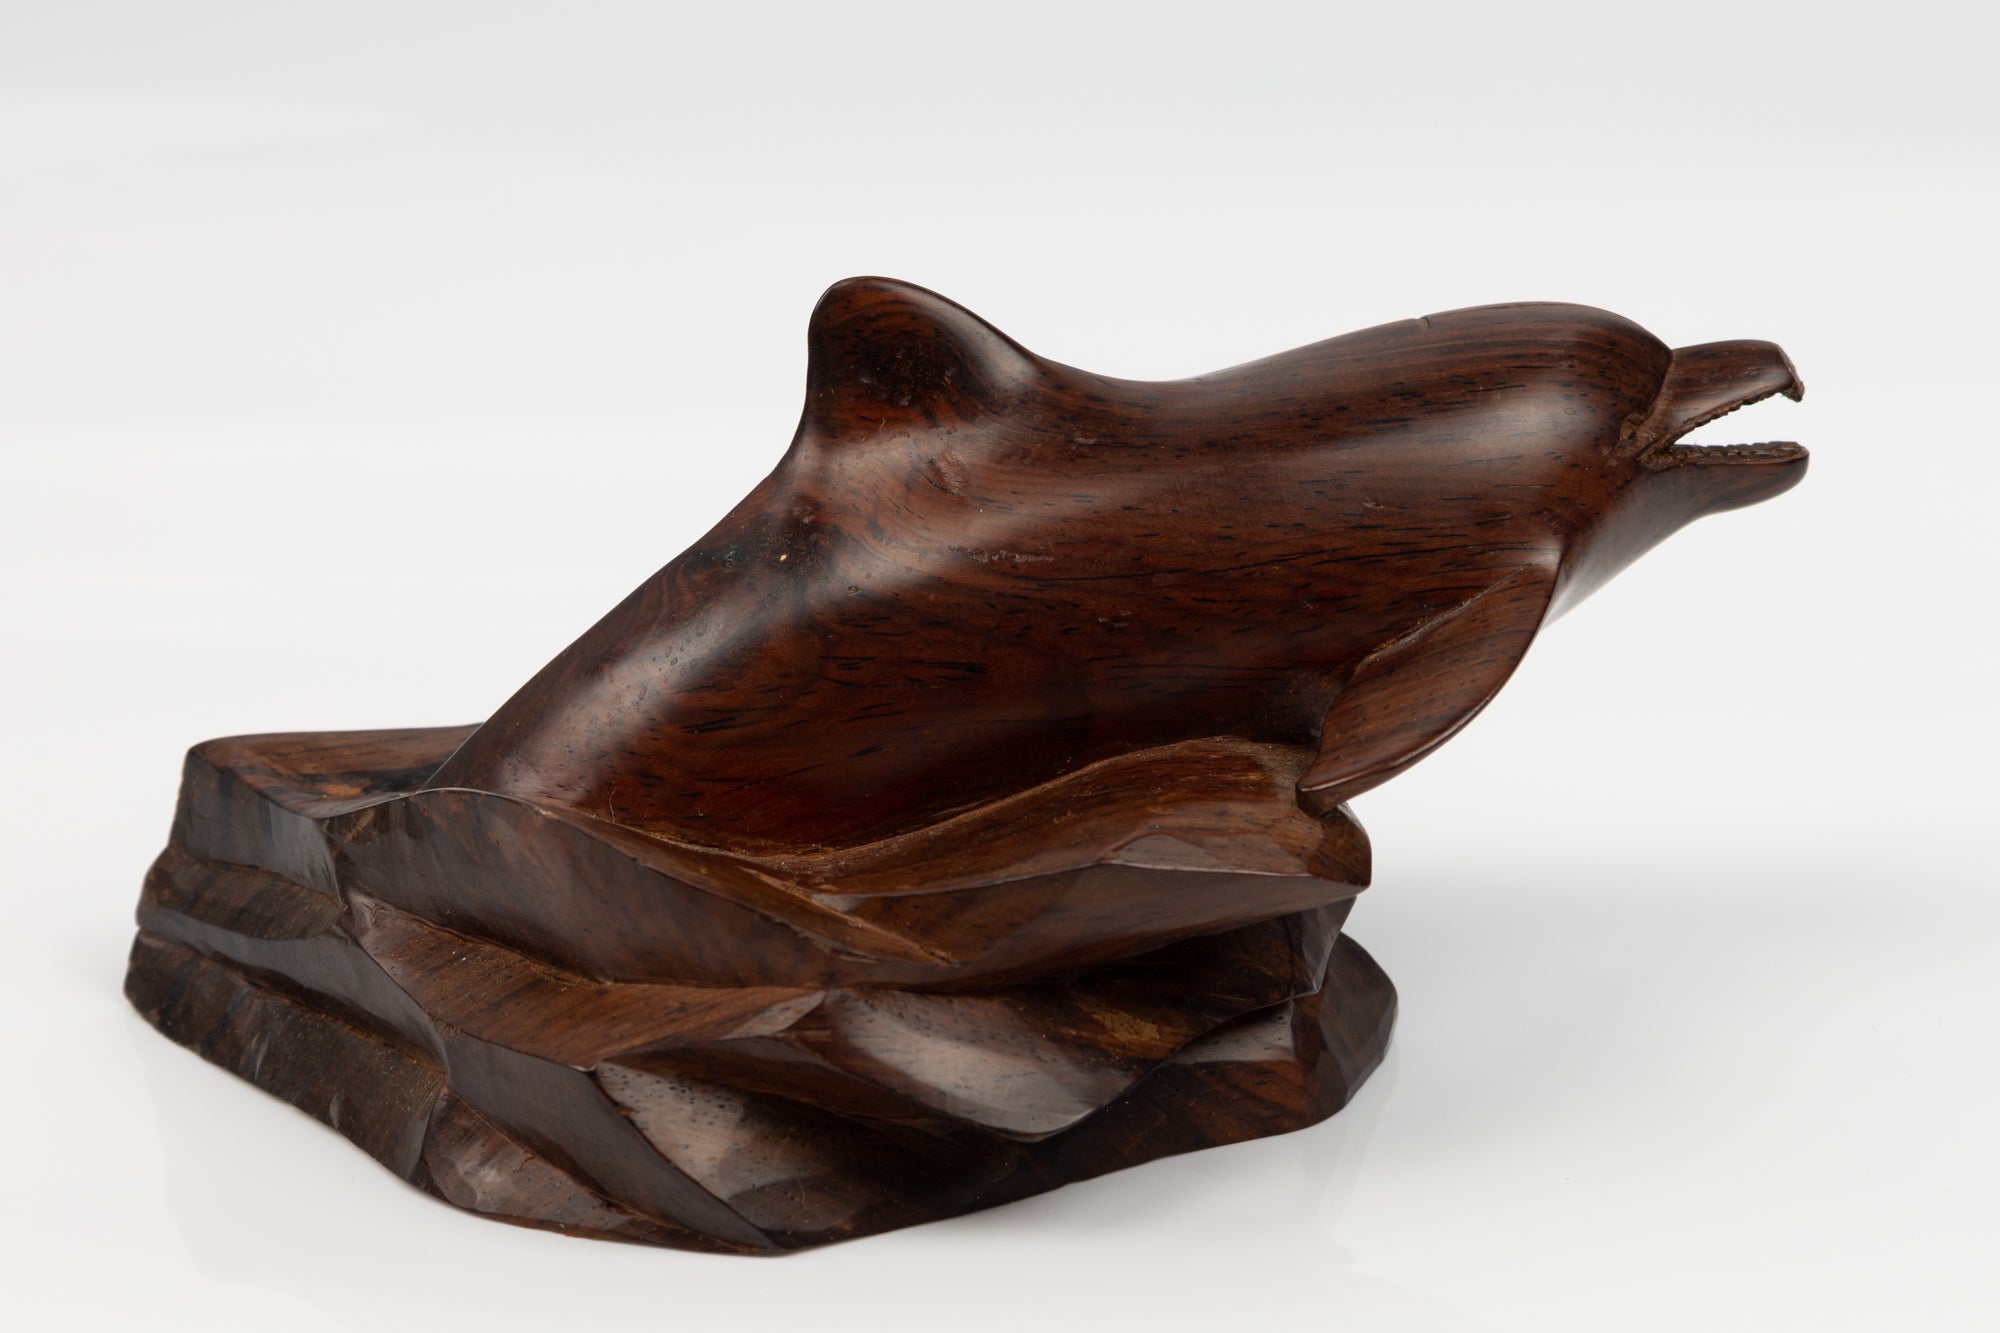 Dolphin Figurine, Wood Carving